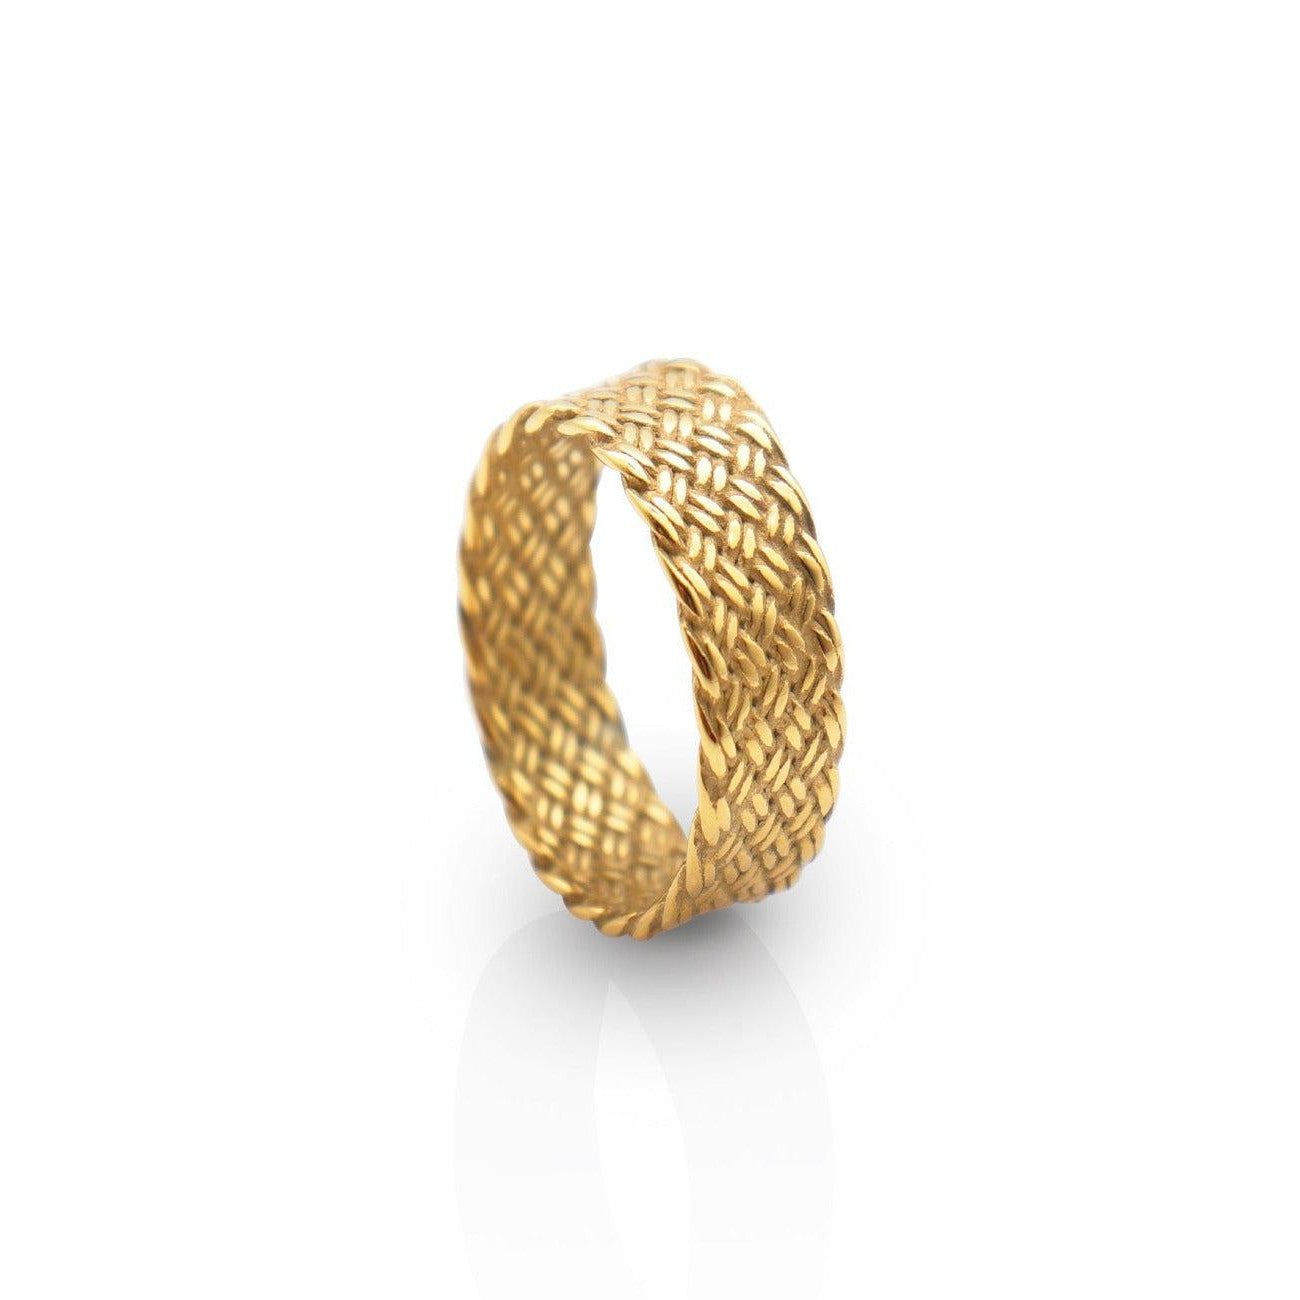 Chris April in stock PVD 18K gold plated Personalized wide version Braided mens ring with 316L stainless steel material